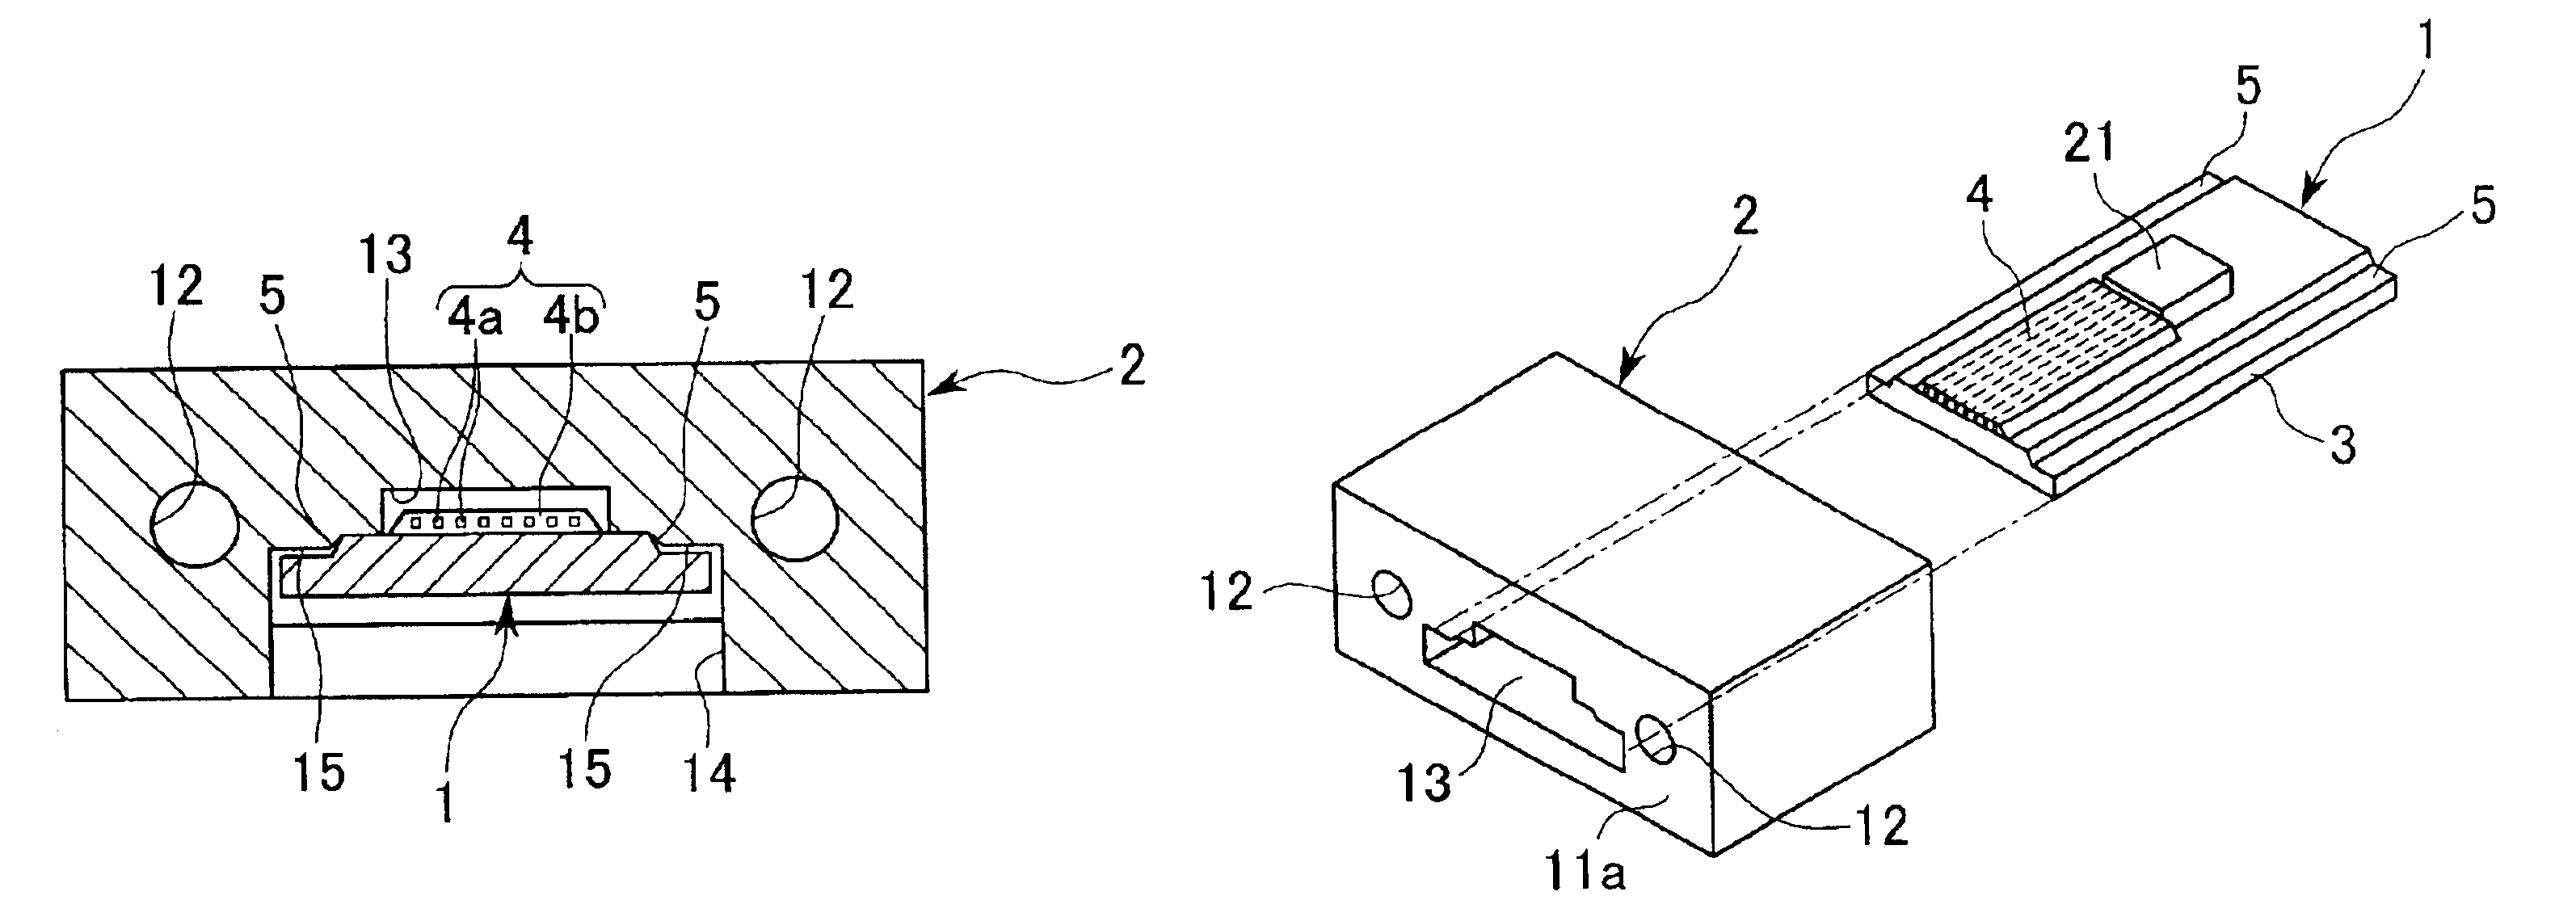 Substrate, optical fiber connection end member, optical element housing member, and method of fabrication of an optical module and the substrate